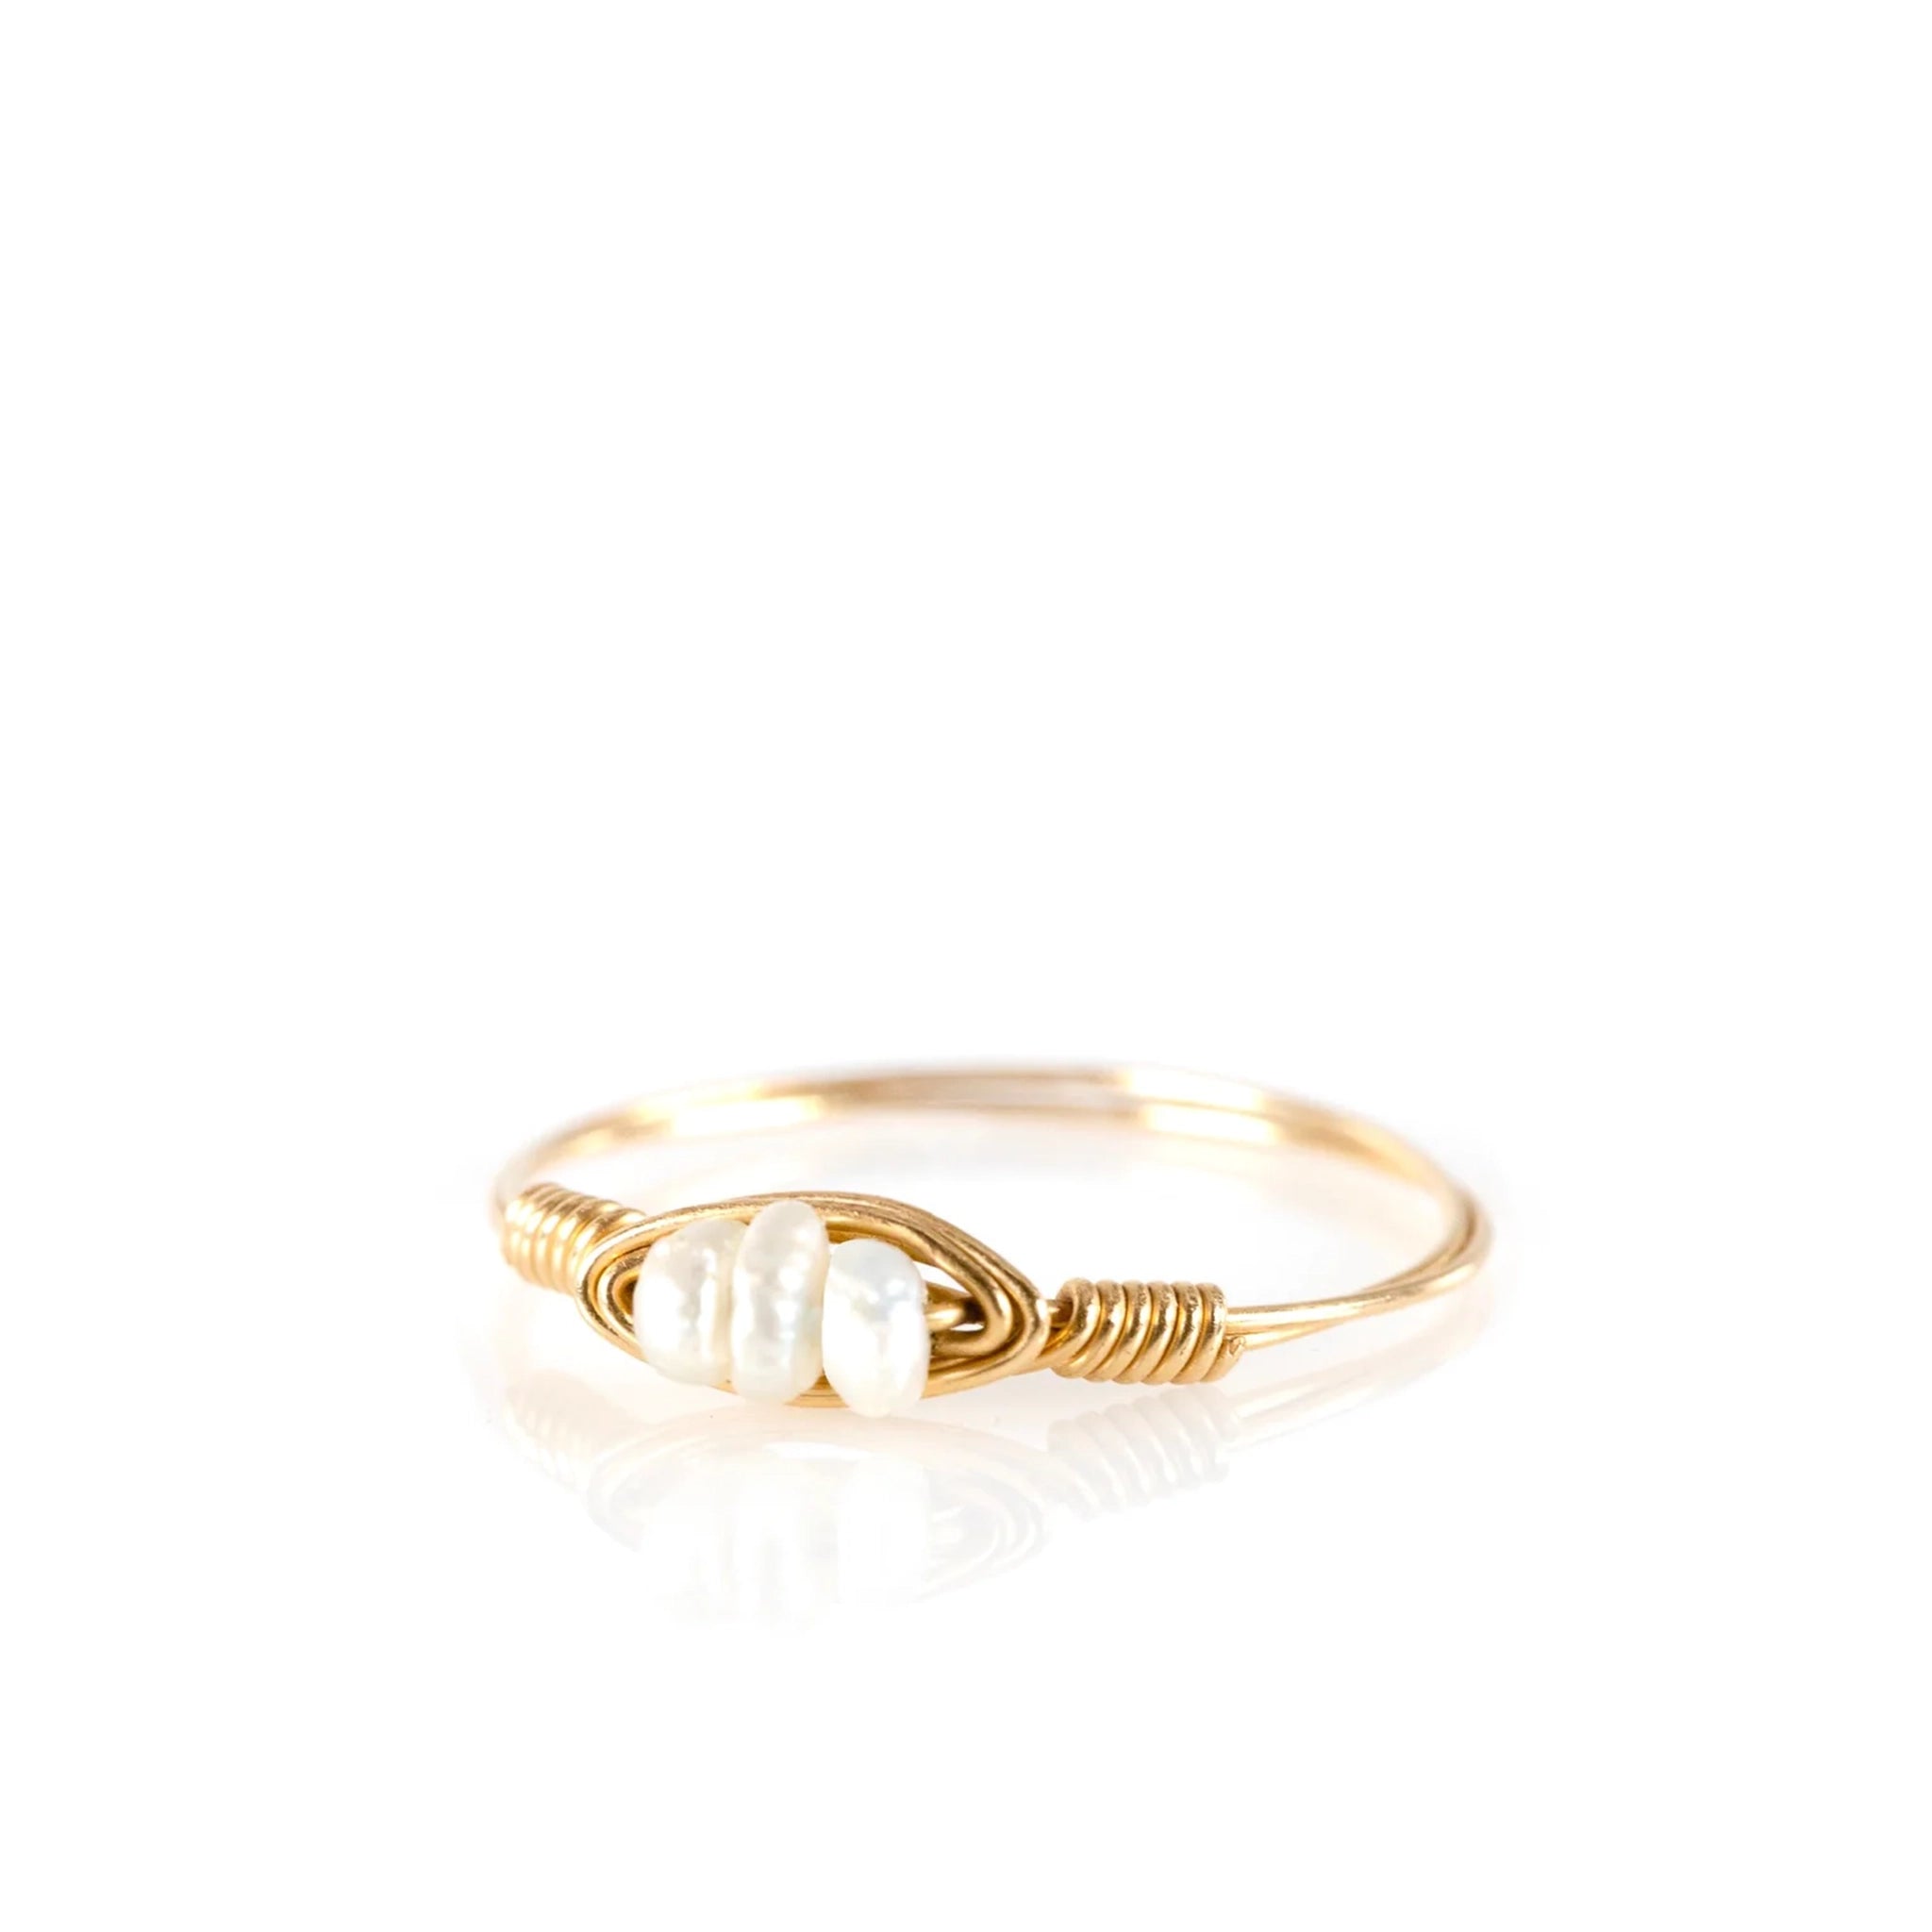 The gold hand crafted statement ring with three small pearls in the center photographed on a white background. 